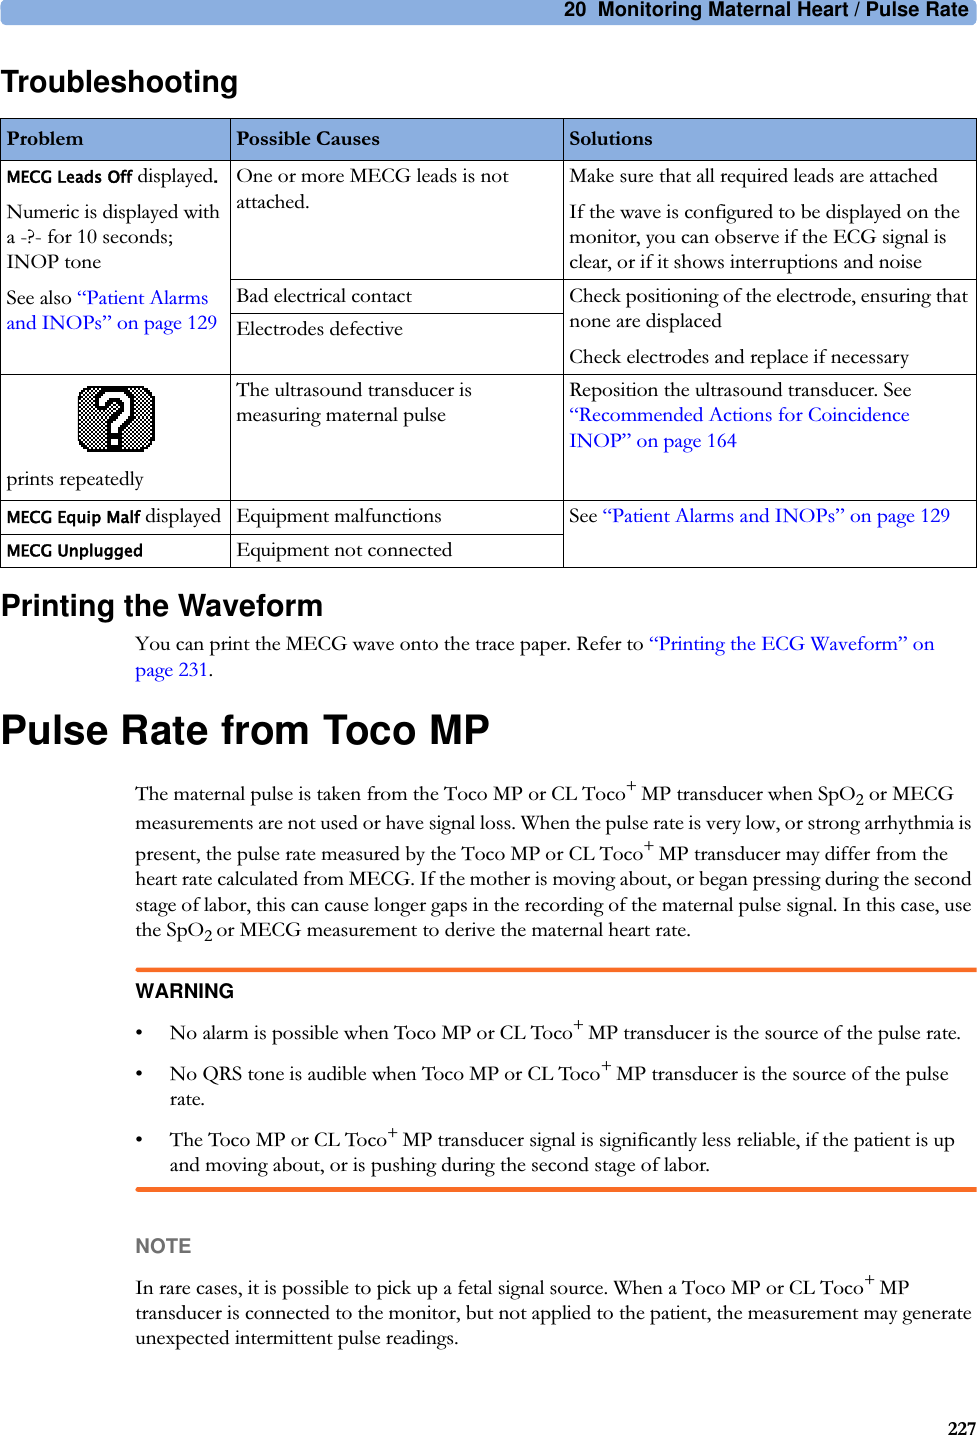 20  Monitoring Maternal Heart / Pulse Rate227TroubleshootingPrinting the WaveformYou can print the MECG wave onto the trace paper. Refer to “Printing the ECG Waveform” on page 231.Pulse Rate from Toco MPThe maternal pulse is taken from the Toco MP or CL Toco+ MP transducer when SpO2 or MECG measurements are not used or have signal loss. When the pulse rate is very low, or strong arrhythmia is present, the pulse rate measured by the Toco MP or CL Toco+ MP transducer may differ from the heart rate calculated from MECG. If the mother is moving about, or began pressing during the second stage of labor, this can cause longer gaps in the recording of the maternal pulse signal. In this case, use the SpO2 or MECG measurement to derive the maternal heart rate.WARNING• No alarm is possible when Toco MP or CL Toco+ MP transducer is the source of the pulse rate.• No QRS tone is audible when Toco MP or CL Toco+ MP transducer is the source of the pulse rate.• The Toco MP or CL Toco+ MP transducer signal is significantly less reliable, if the patient is up and moving about, or is pushing during the second stage of labor.NOTEIn rare cases, it is possible to pick up a fetal signal source. When a Toco MP or CL Toco+ MP transducer is connected to the monitor, but not applied to the patient, the measurement may generate unexpected intermittent pulse readings.Problem Possible Causes SolutionsMECG Leads Off displayed.Numeric is displayed with a -?- for 10 seconds; INOP toneSee also “Patient Alarms and INOPs” on page 129One or more MECG leads is not attached.Make sure that all required leads are attachedIf the wave is configured to be displayed on the monitor, you can observe if the ECG signal is clear, or if it shows interruptions and noiseBad electrical contact Check positioning of the electrode, ensuring that none are displacedCheck electrodes and replace if necessaryElectrodes defectiveprints repeatedlyThe ultrasound transducer is measuring maternal pulseReposition the ultrasound transducer. See “Recommended Actions for Coincidence INOP” on page 164MECG Equip Malf displayed Equipment malfunctions See “Patient Alarms and INOPs” on page 129MECG UnpluggedEquipment not connected